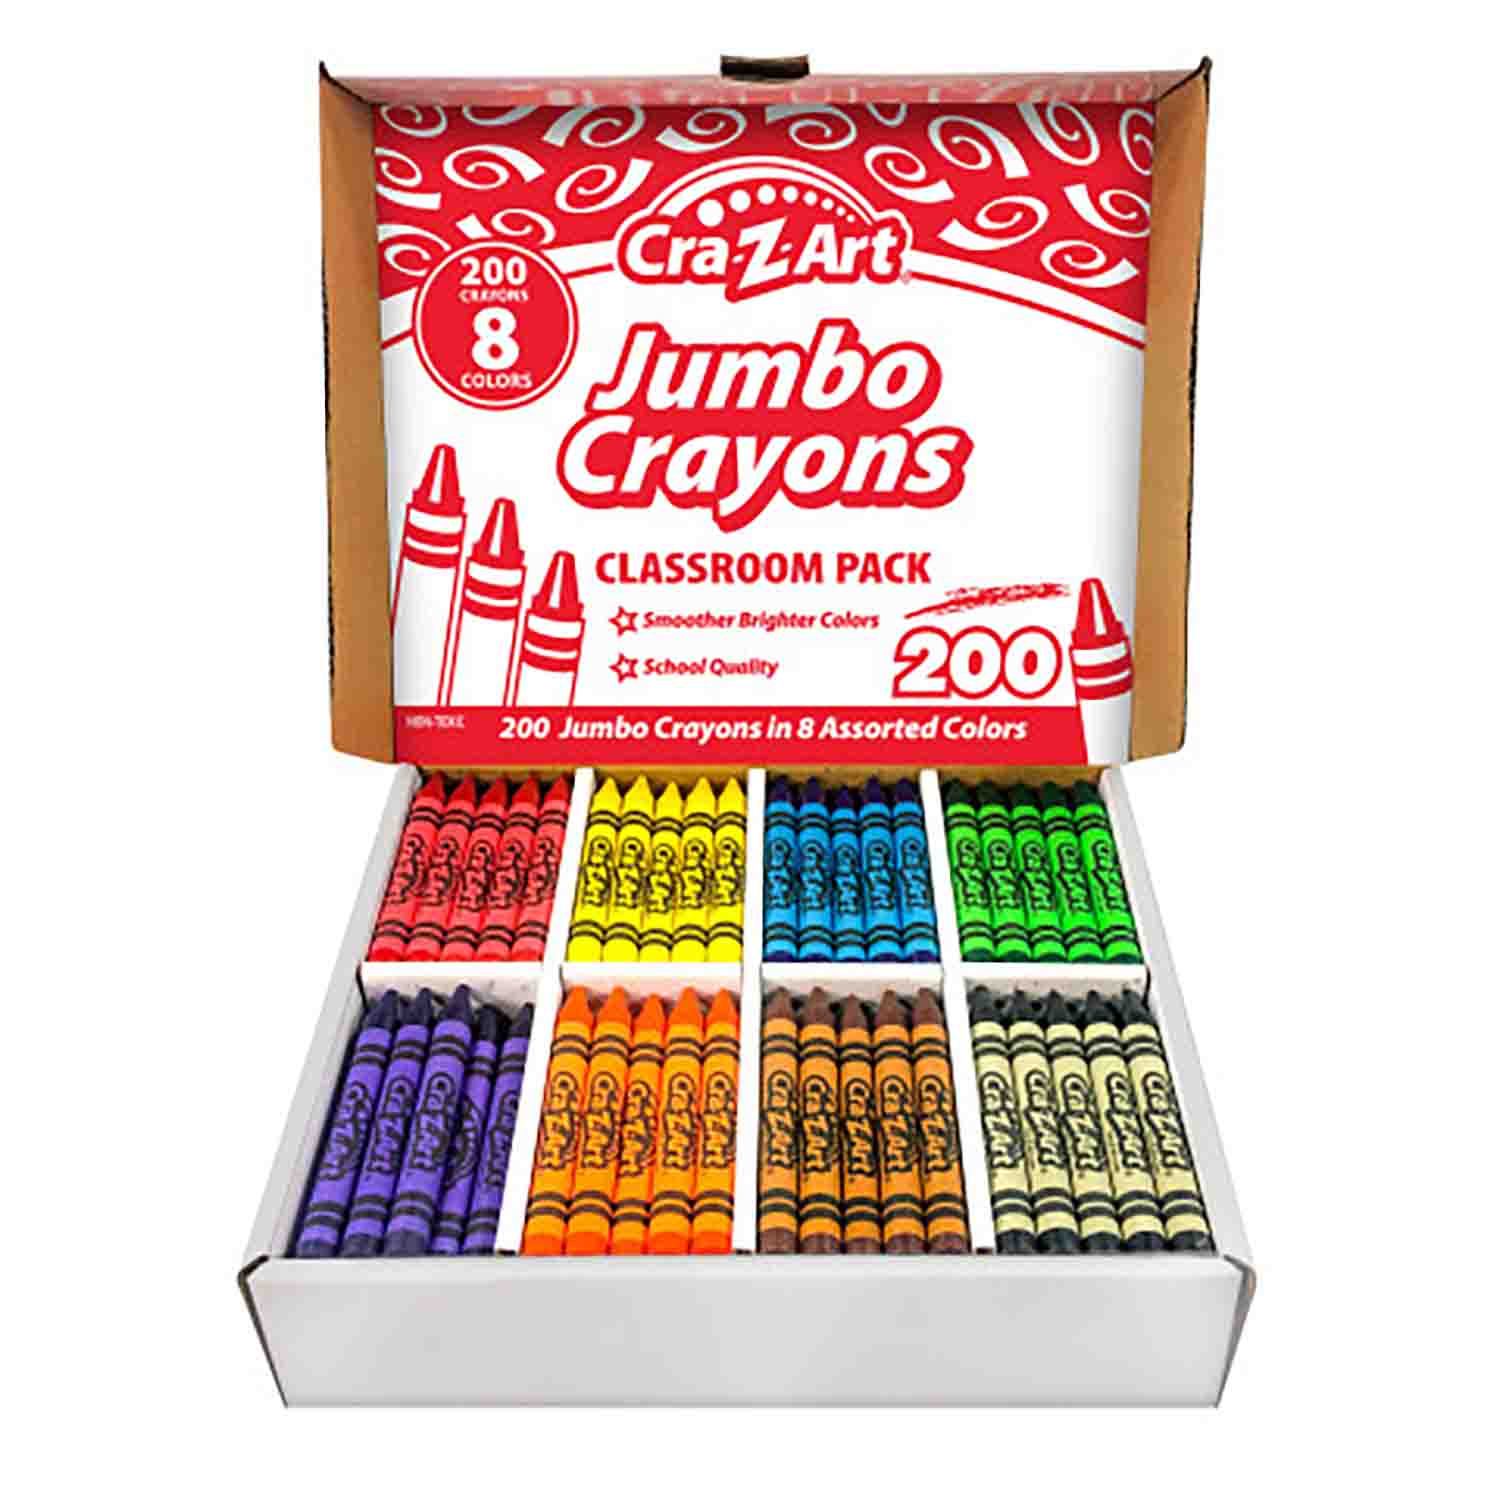 Large Crayons, Lift Lid Box, 16 Colors/Box - BOSS Office and Computer  Products